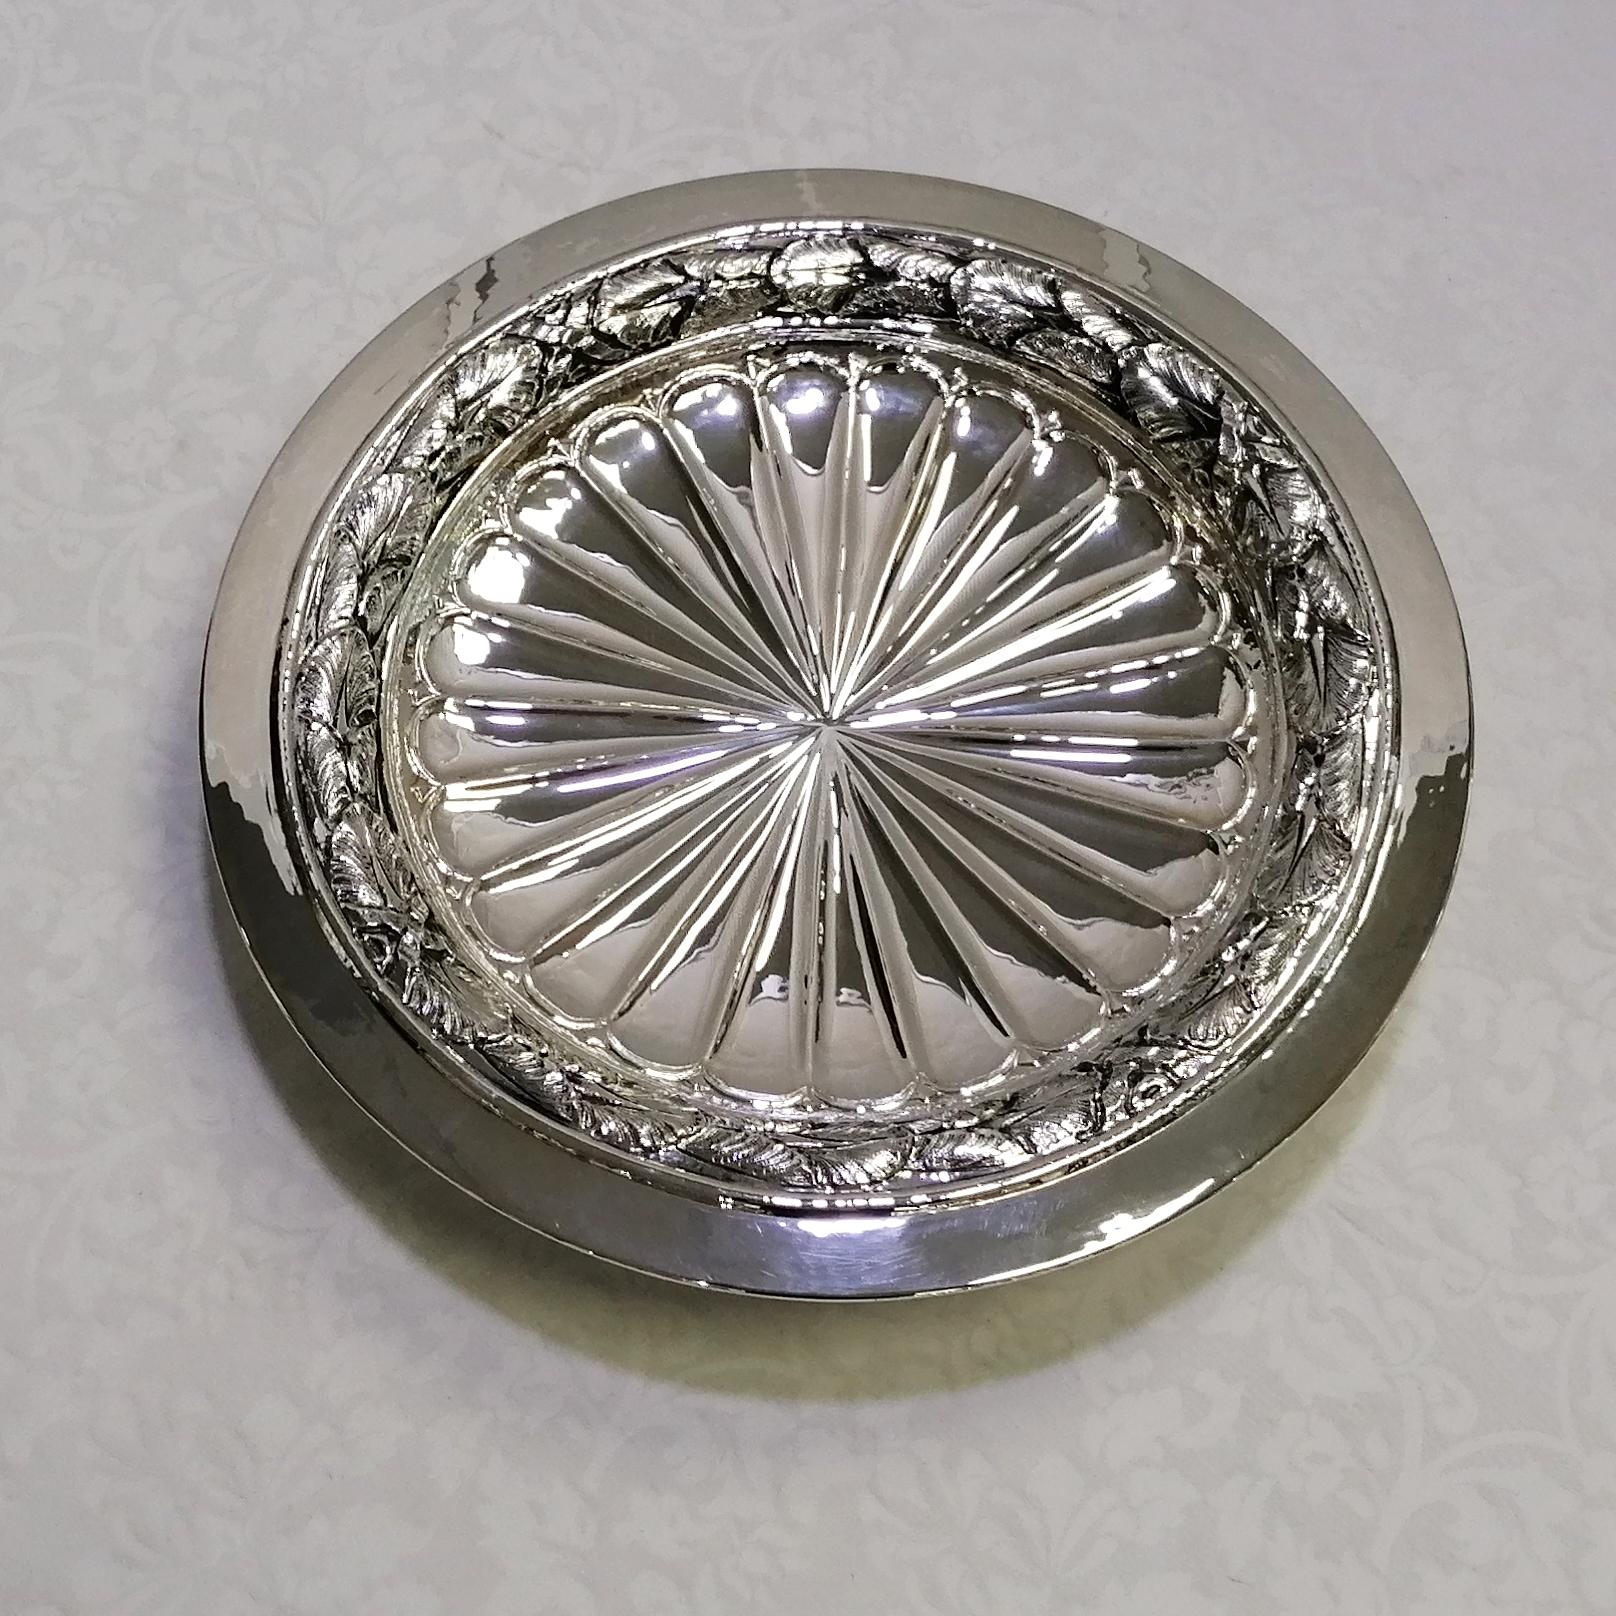 Contemporary 21th Century Italian Sterling Silver Empire Style Centerpiece Dish on Feet  For Sale